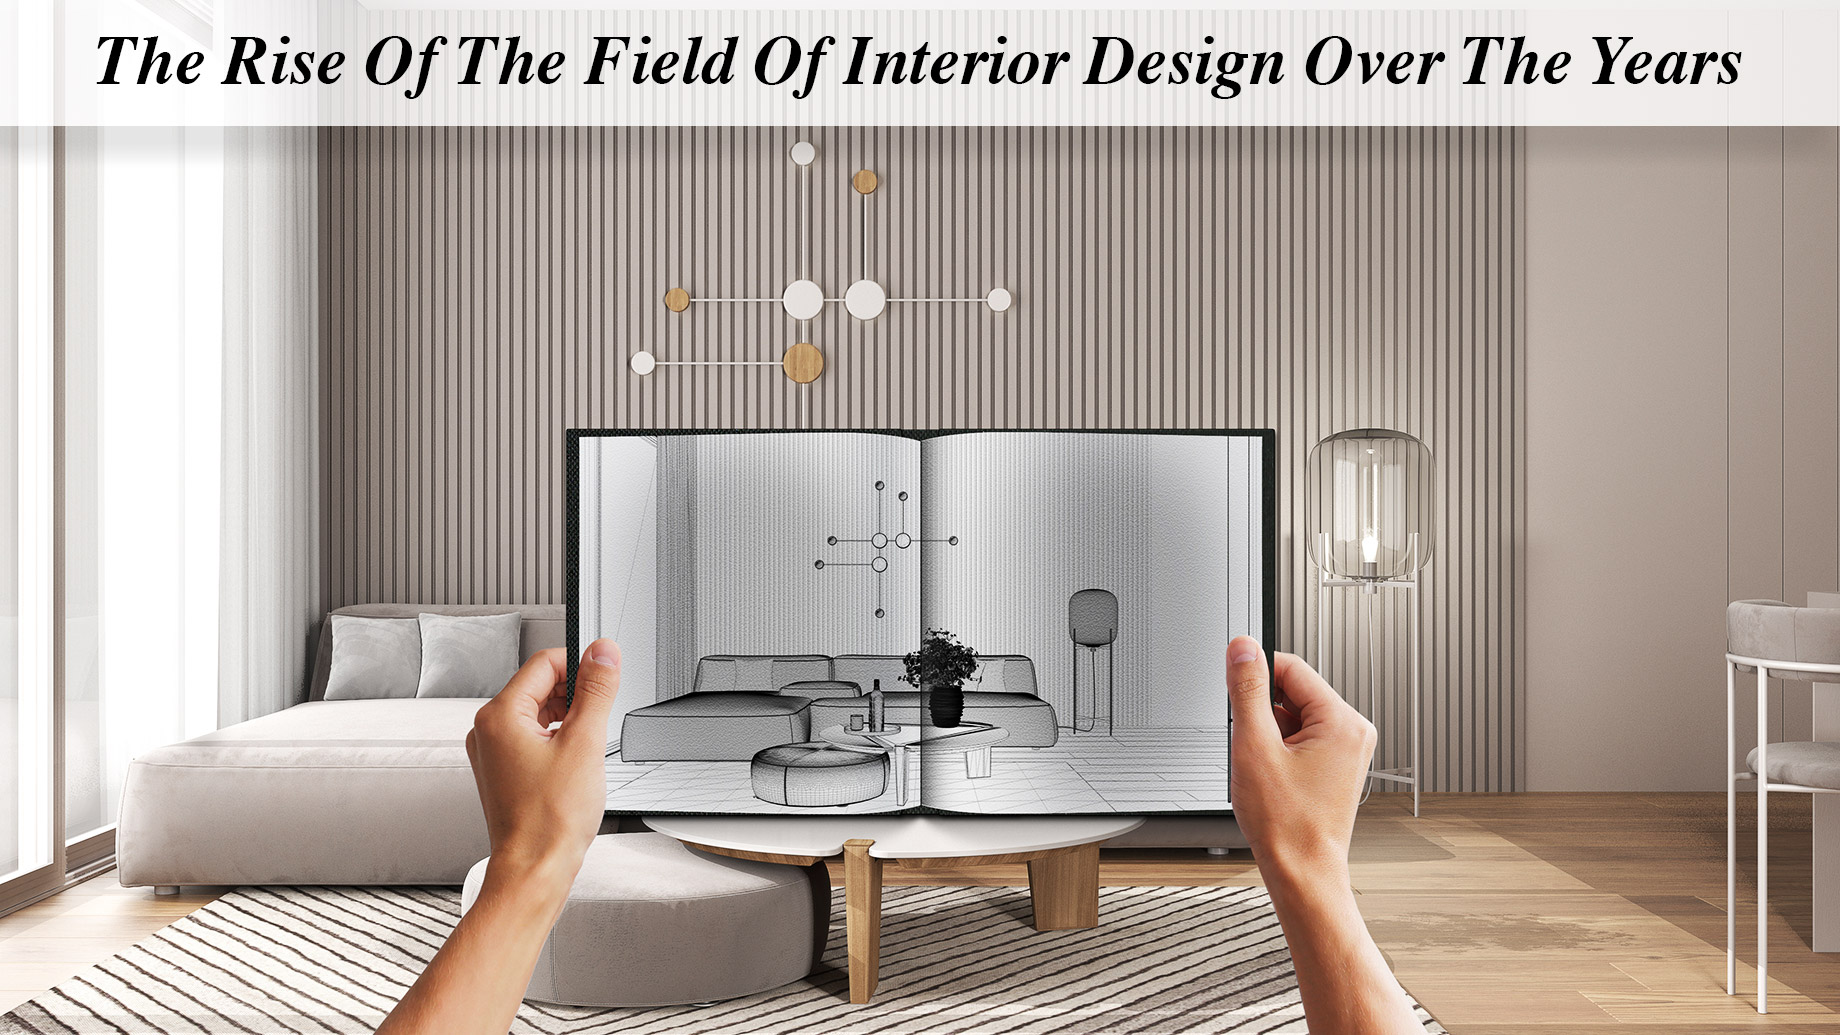 The Rise Of The Field Of Interior Design Over The Years